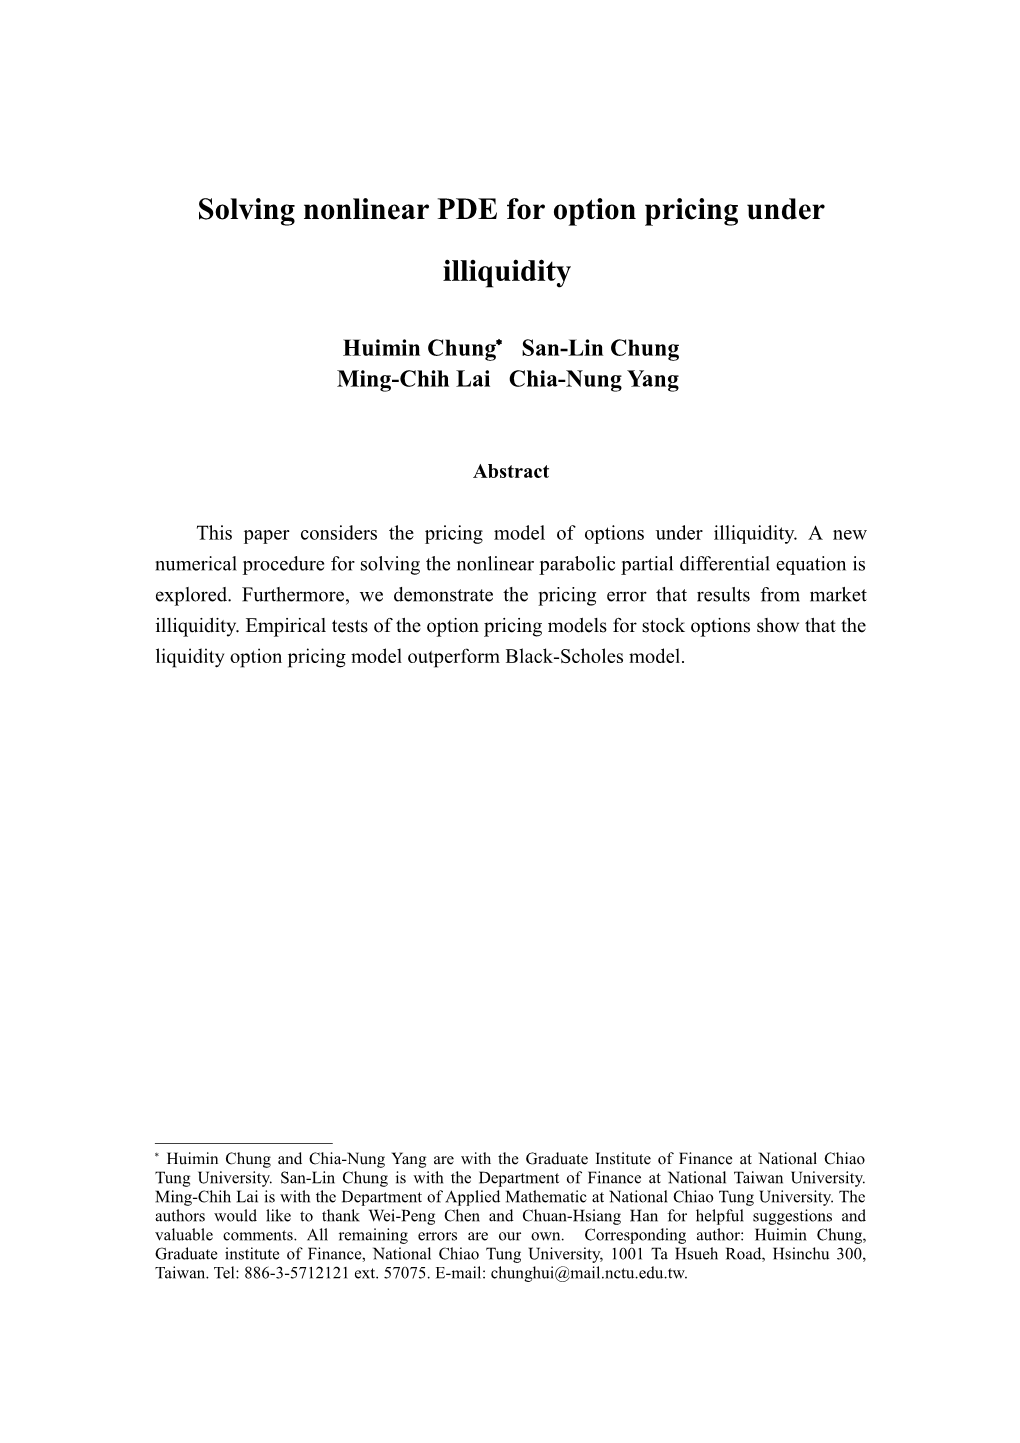 Solving Nonlinear PDE for Option Pricing Under Illiquidity